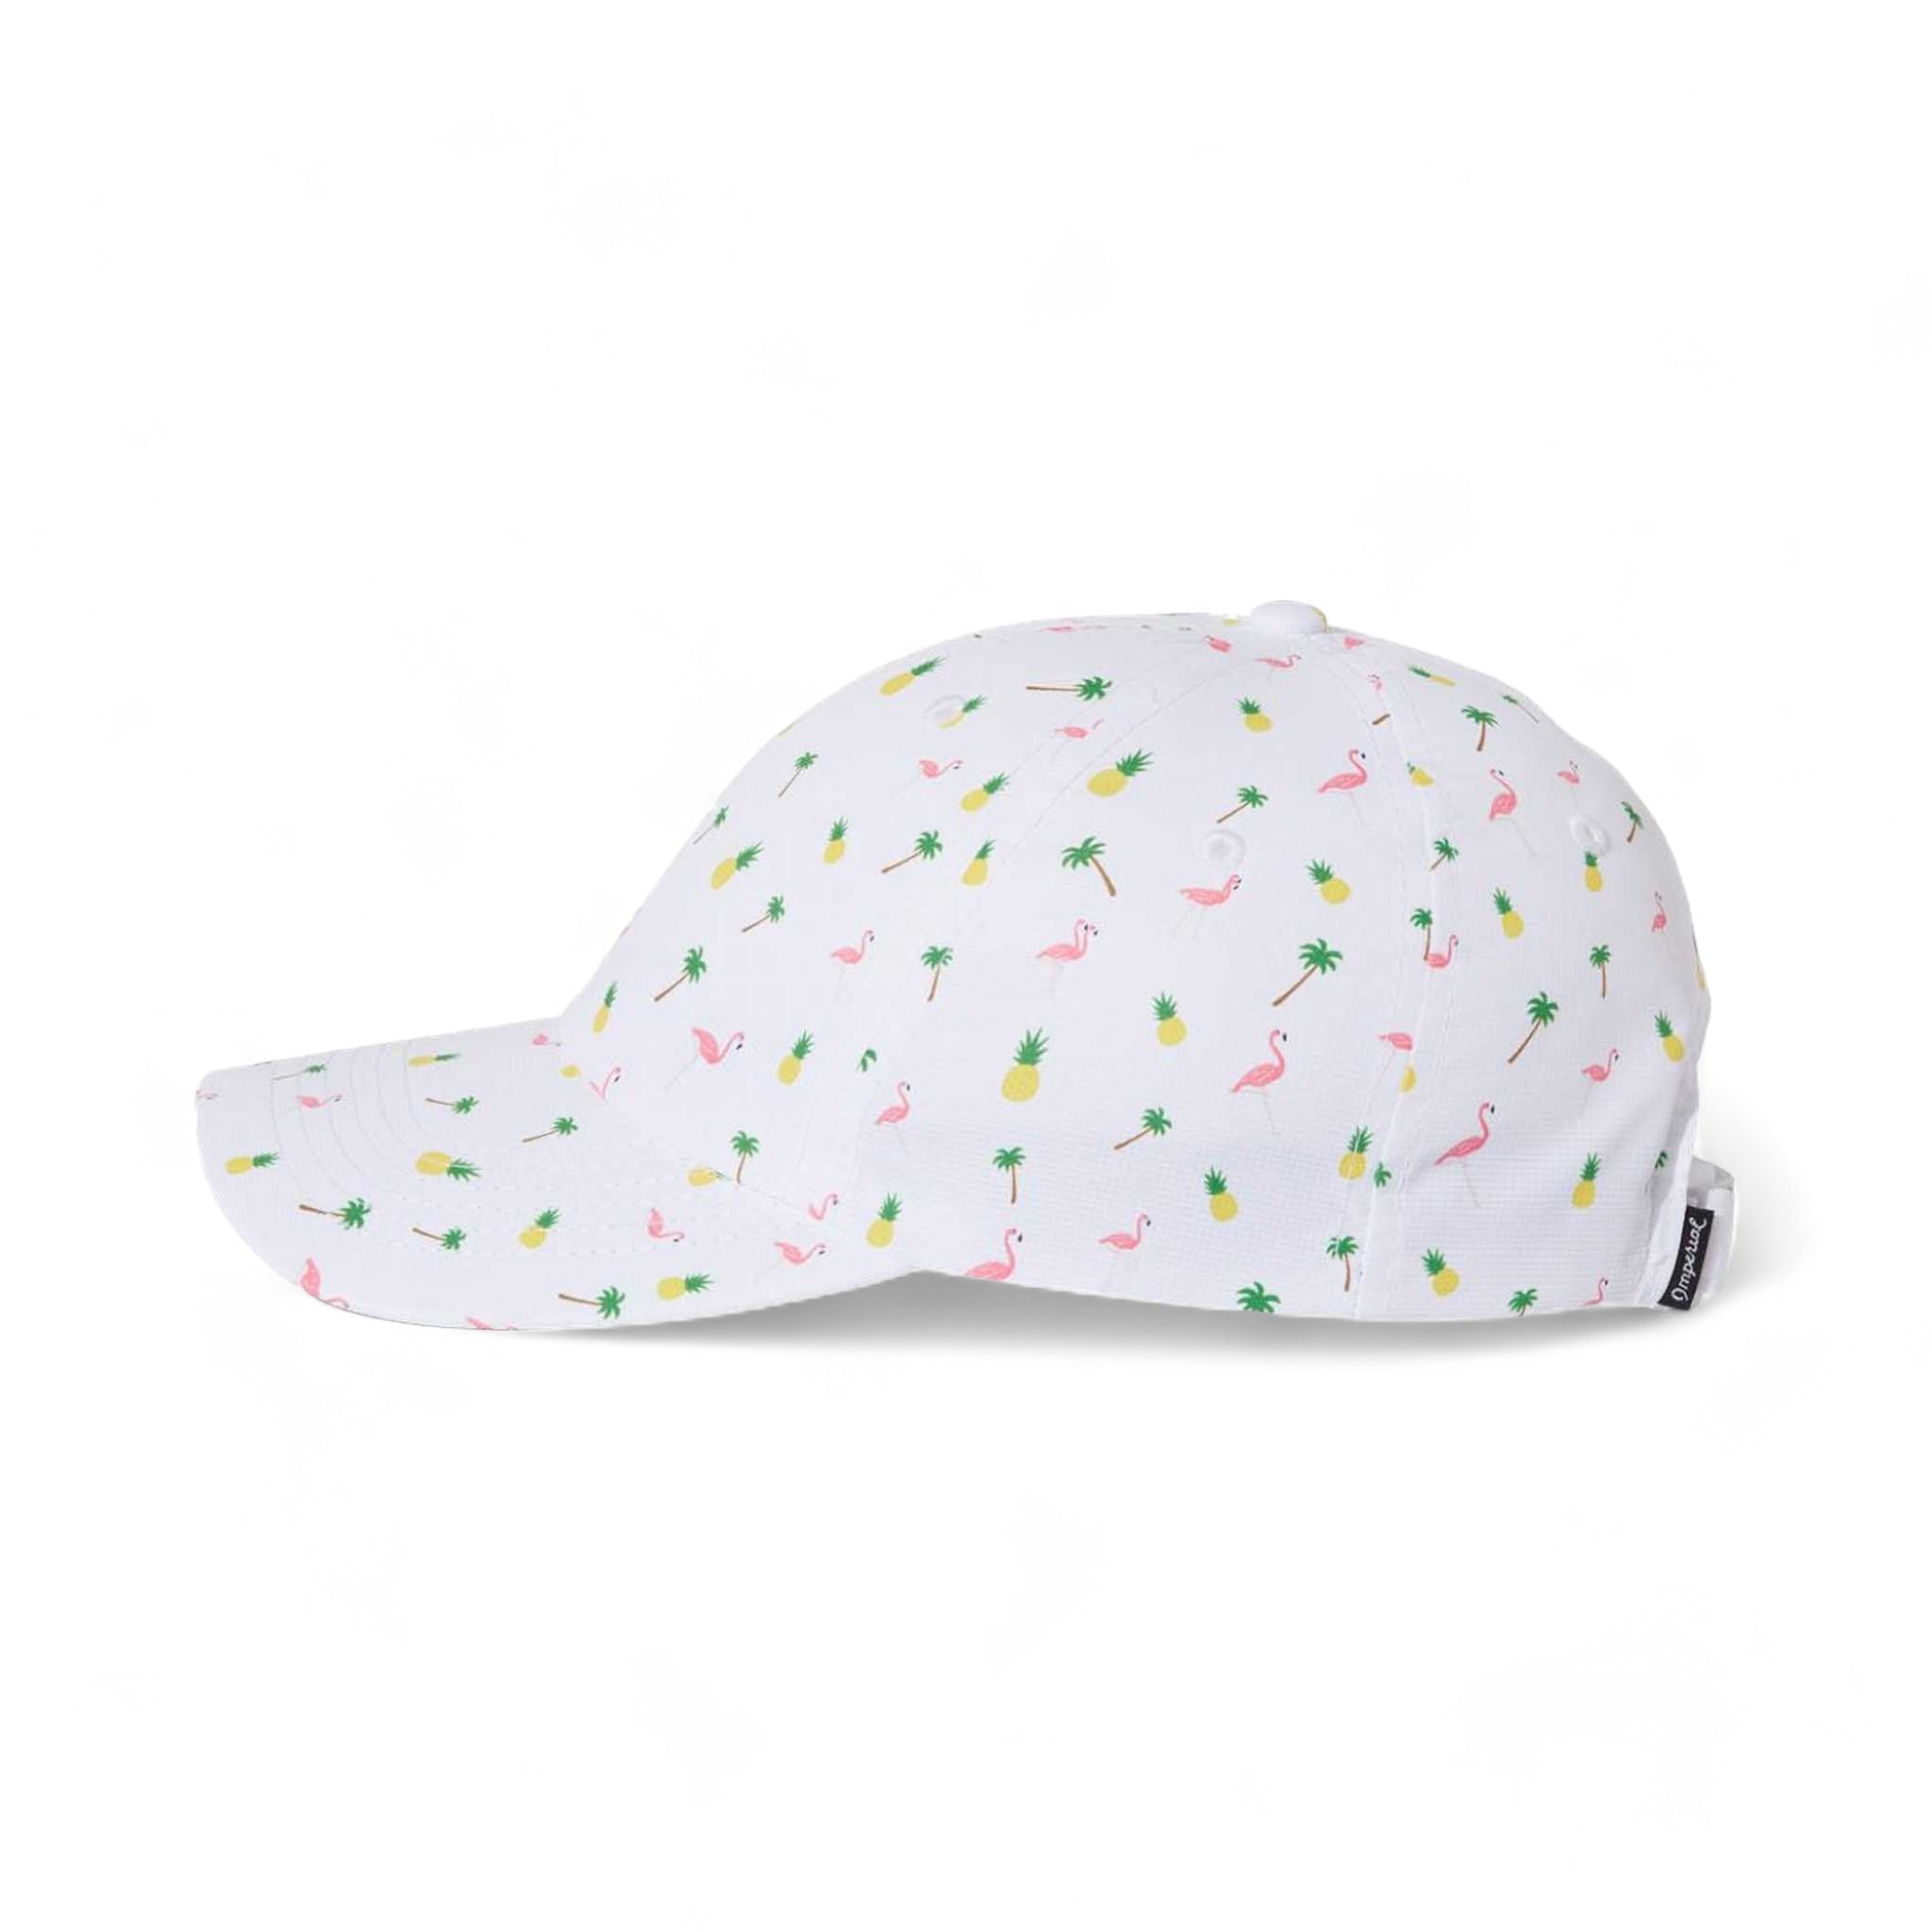 Side view of Imperial X210R custom hat in white tropical